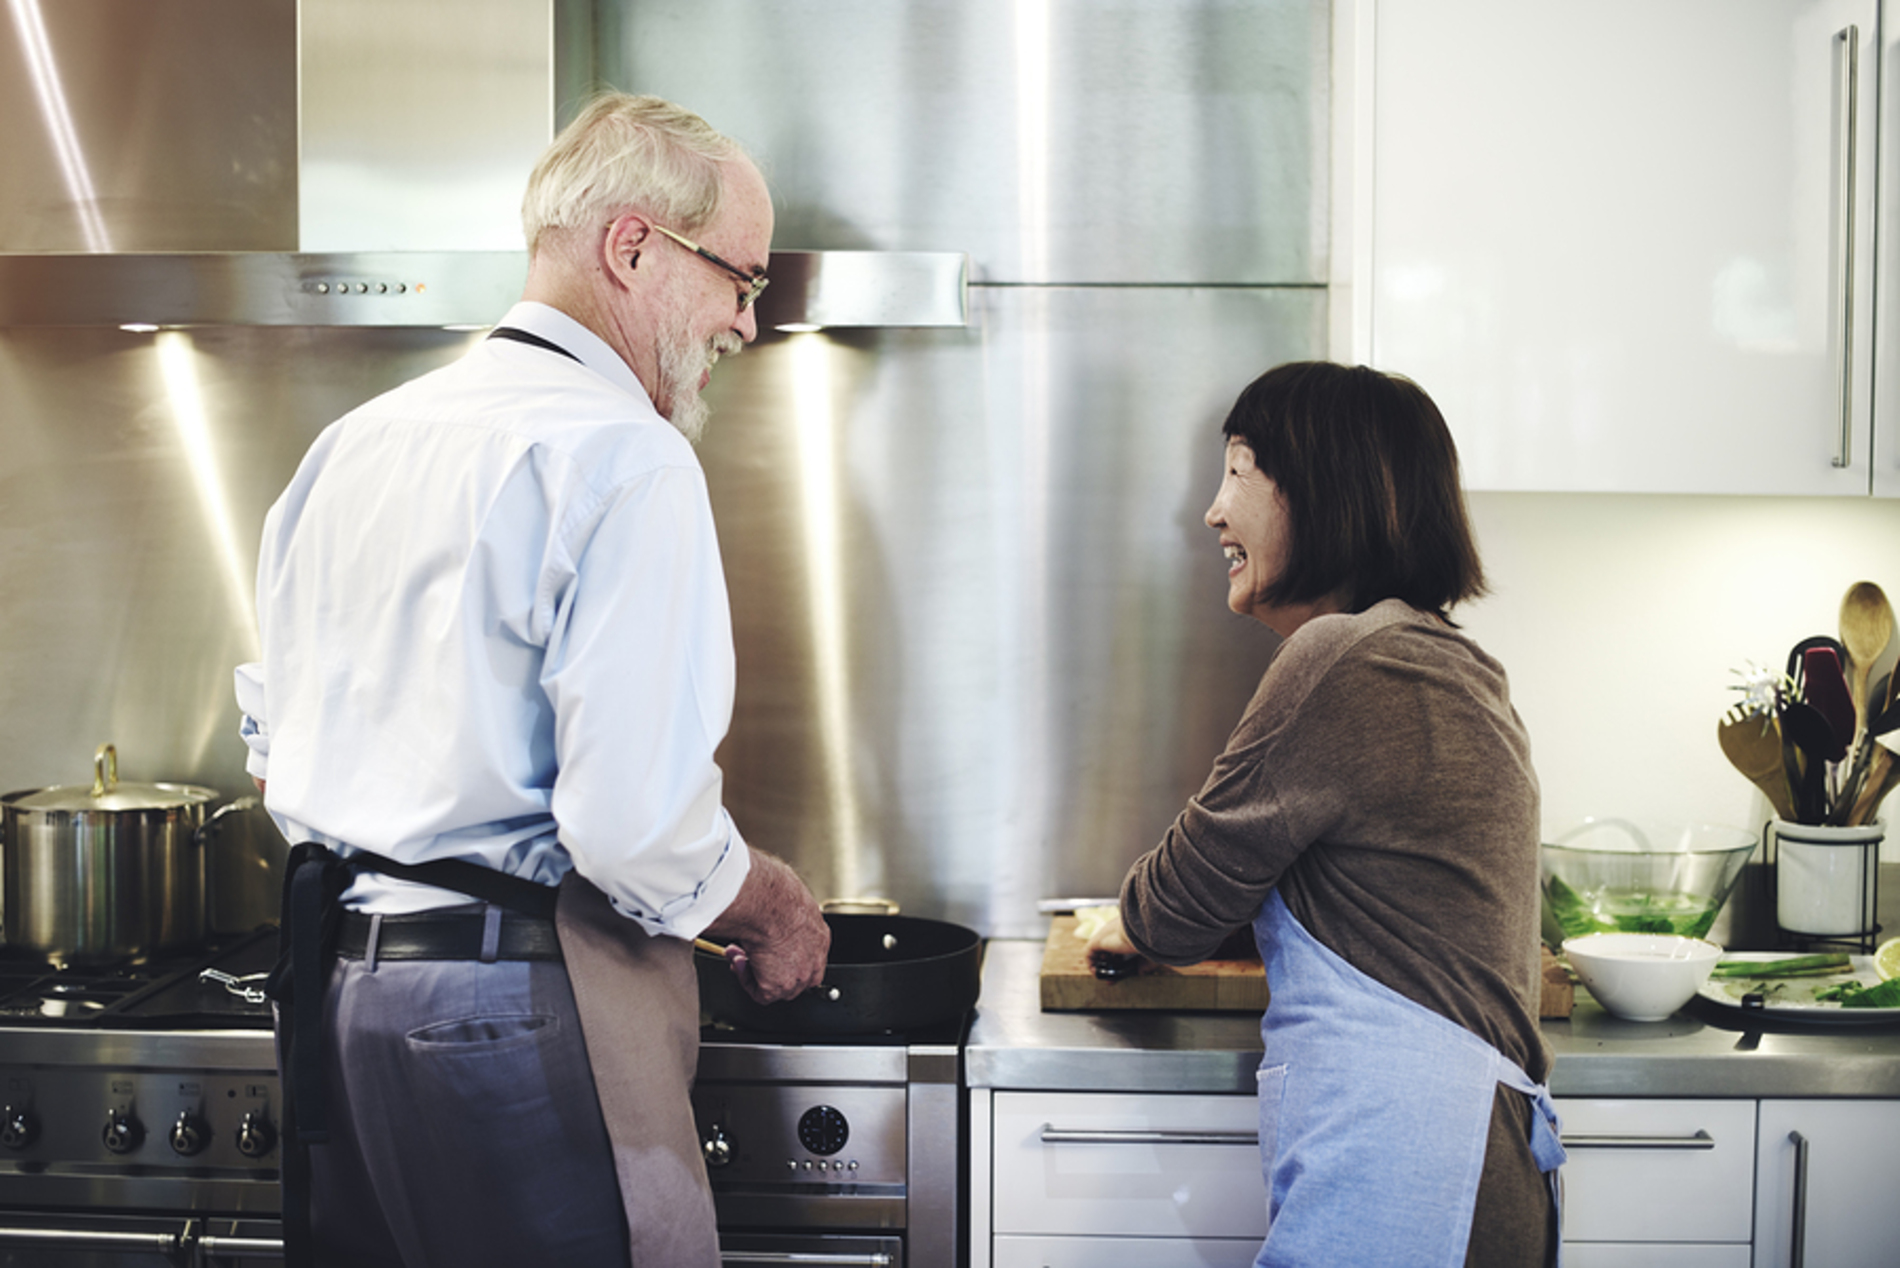 Two people cooking in a kitchen.